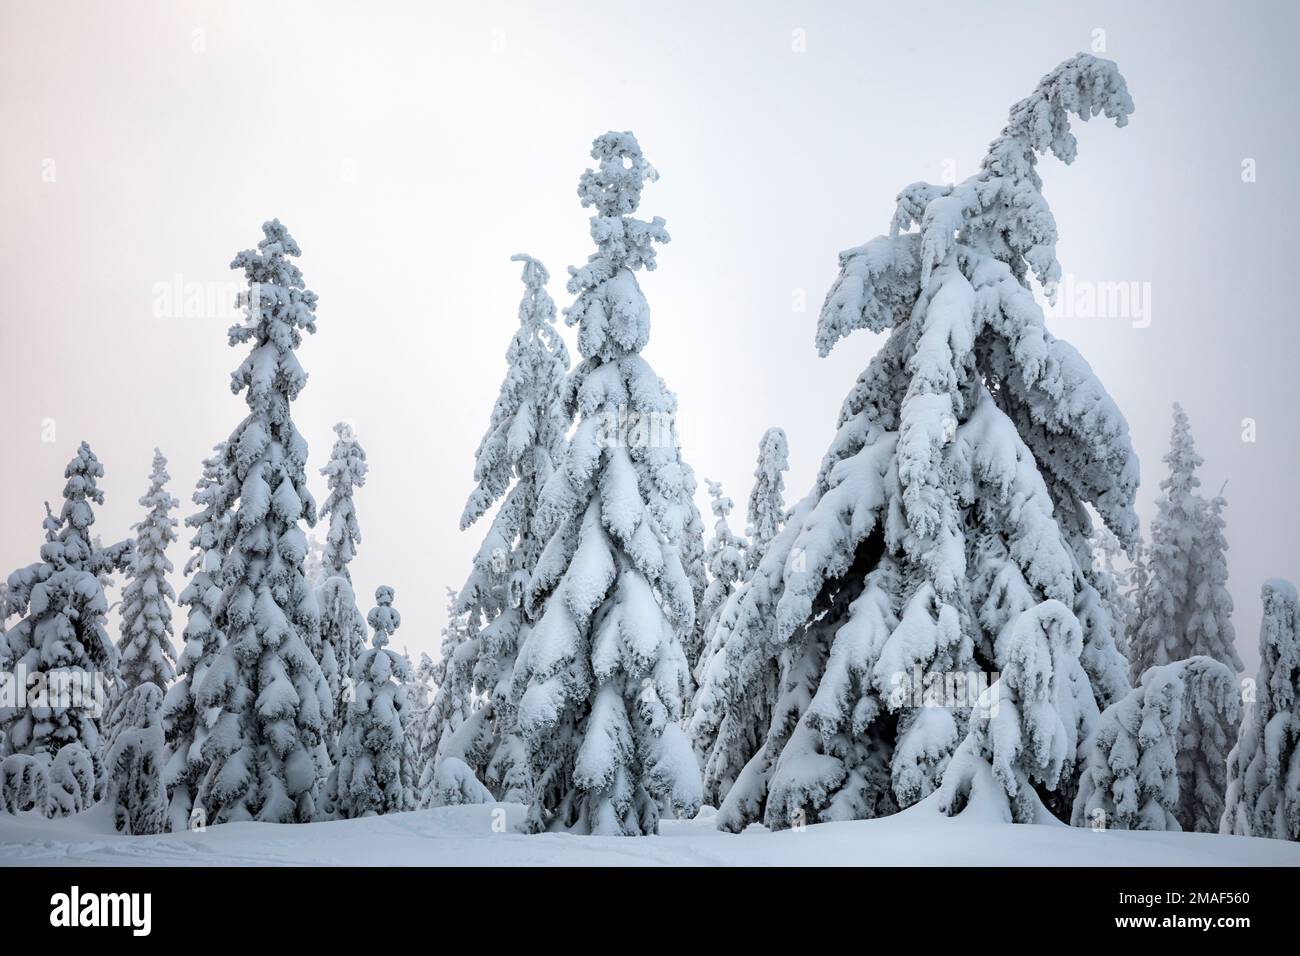 WA22948-00...WASHINGTON - Snow covered trees just above a fog layer on Mount Amabilis in the Okanogan-Wenatchee National Forest. Stock Photo